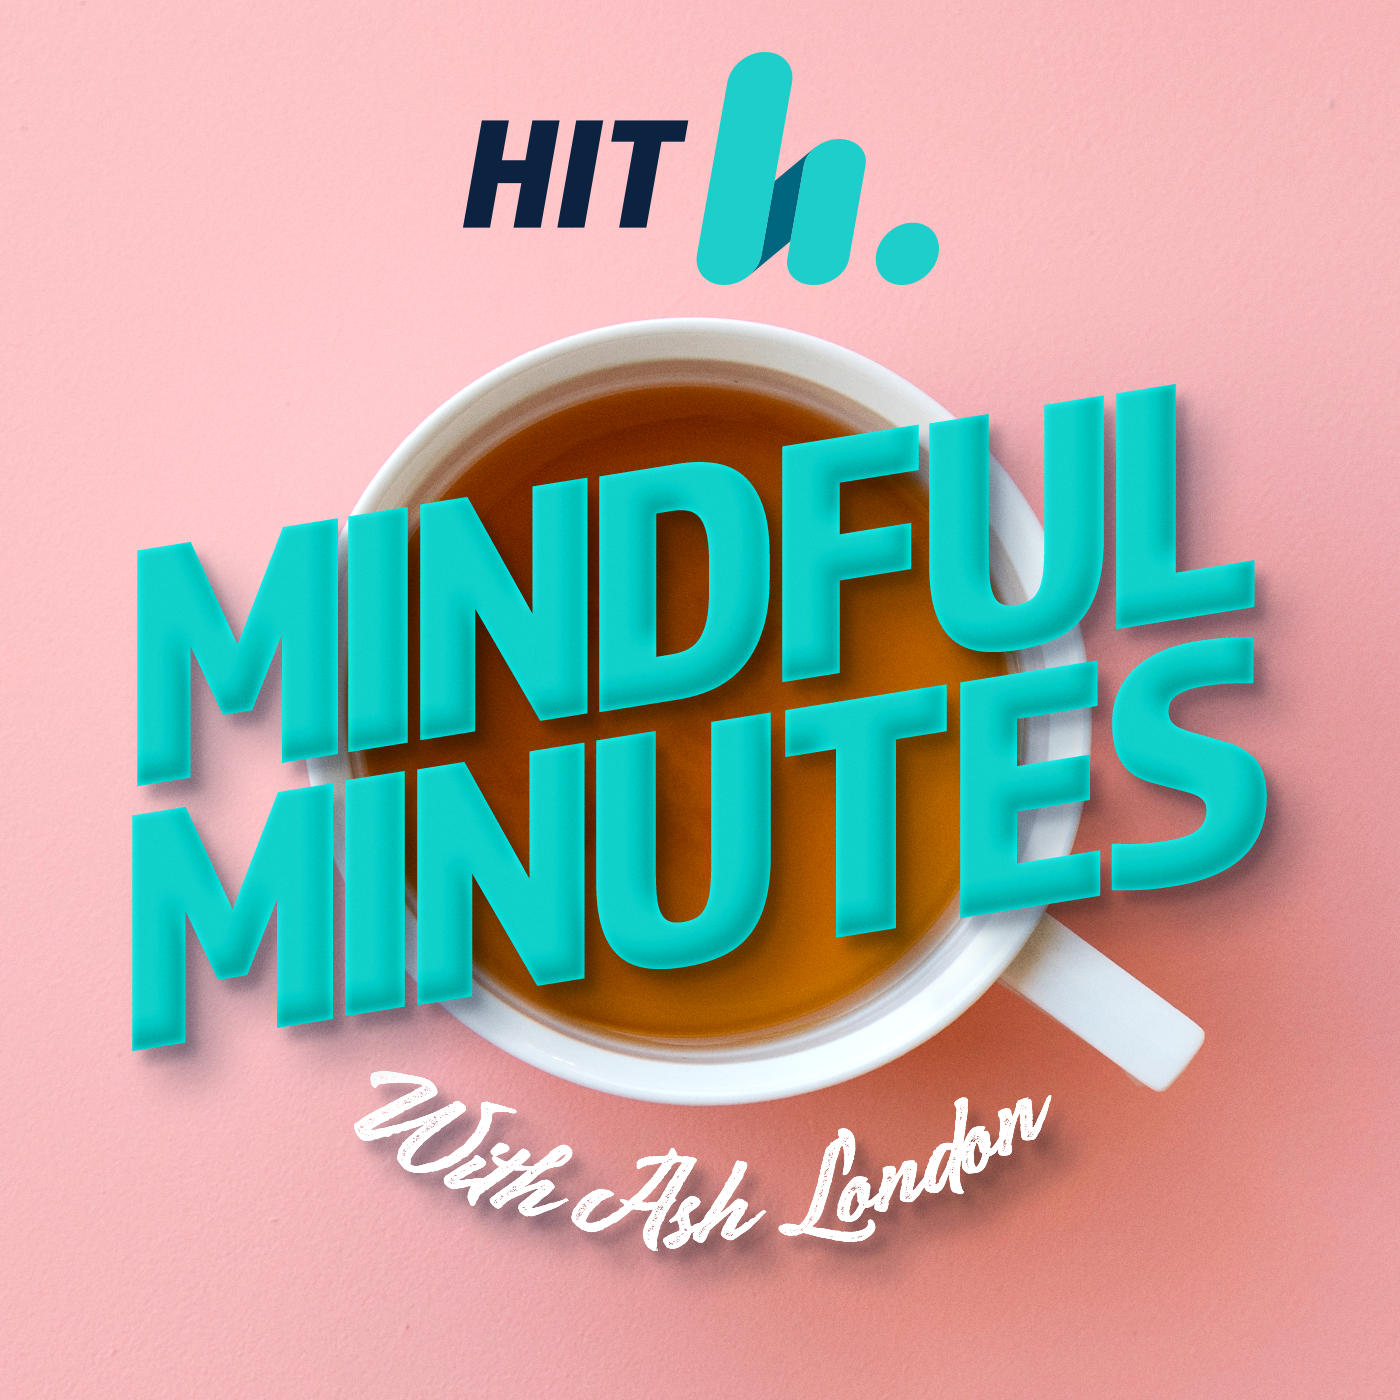 Mindful Minutes with Ash London